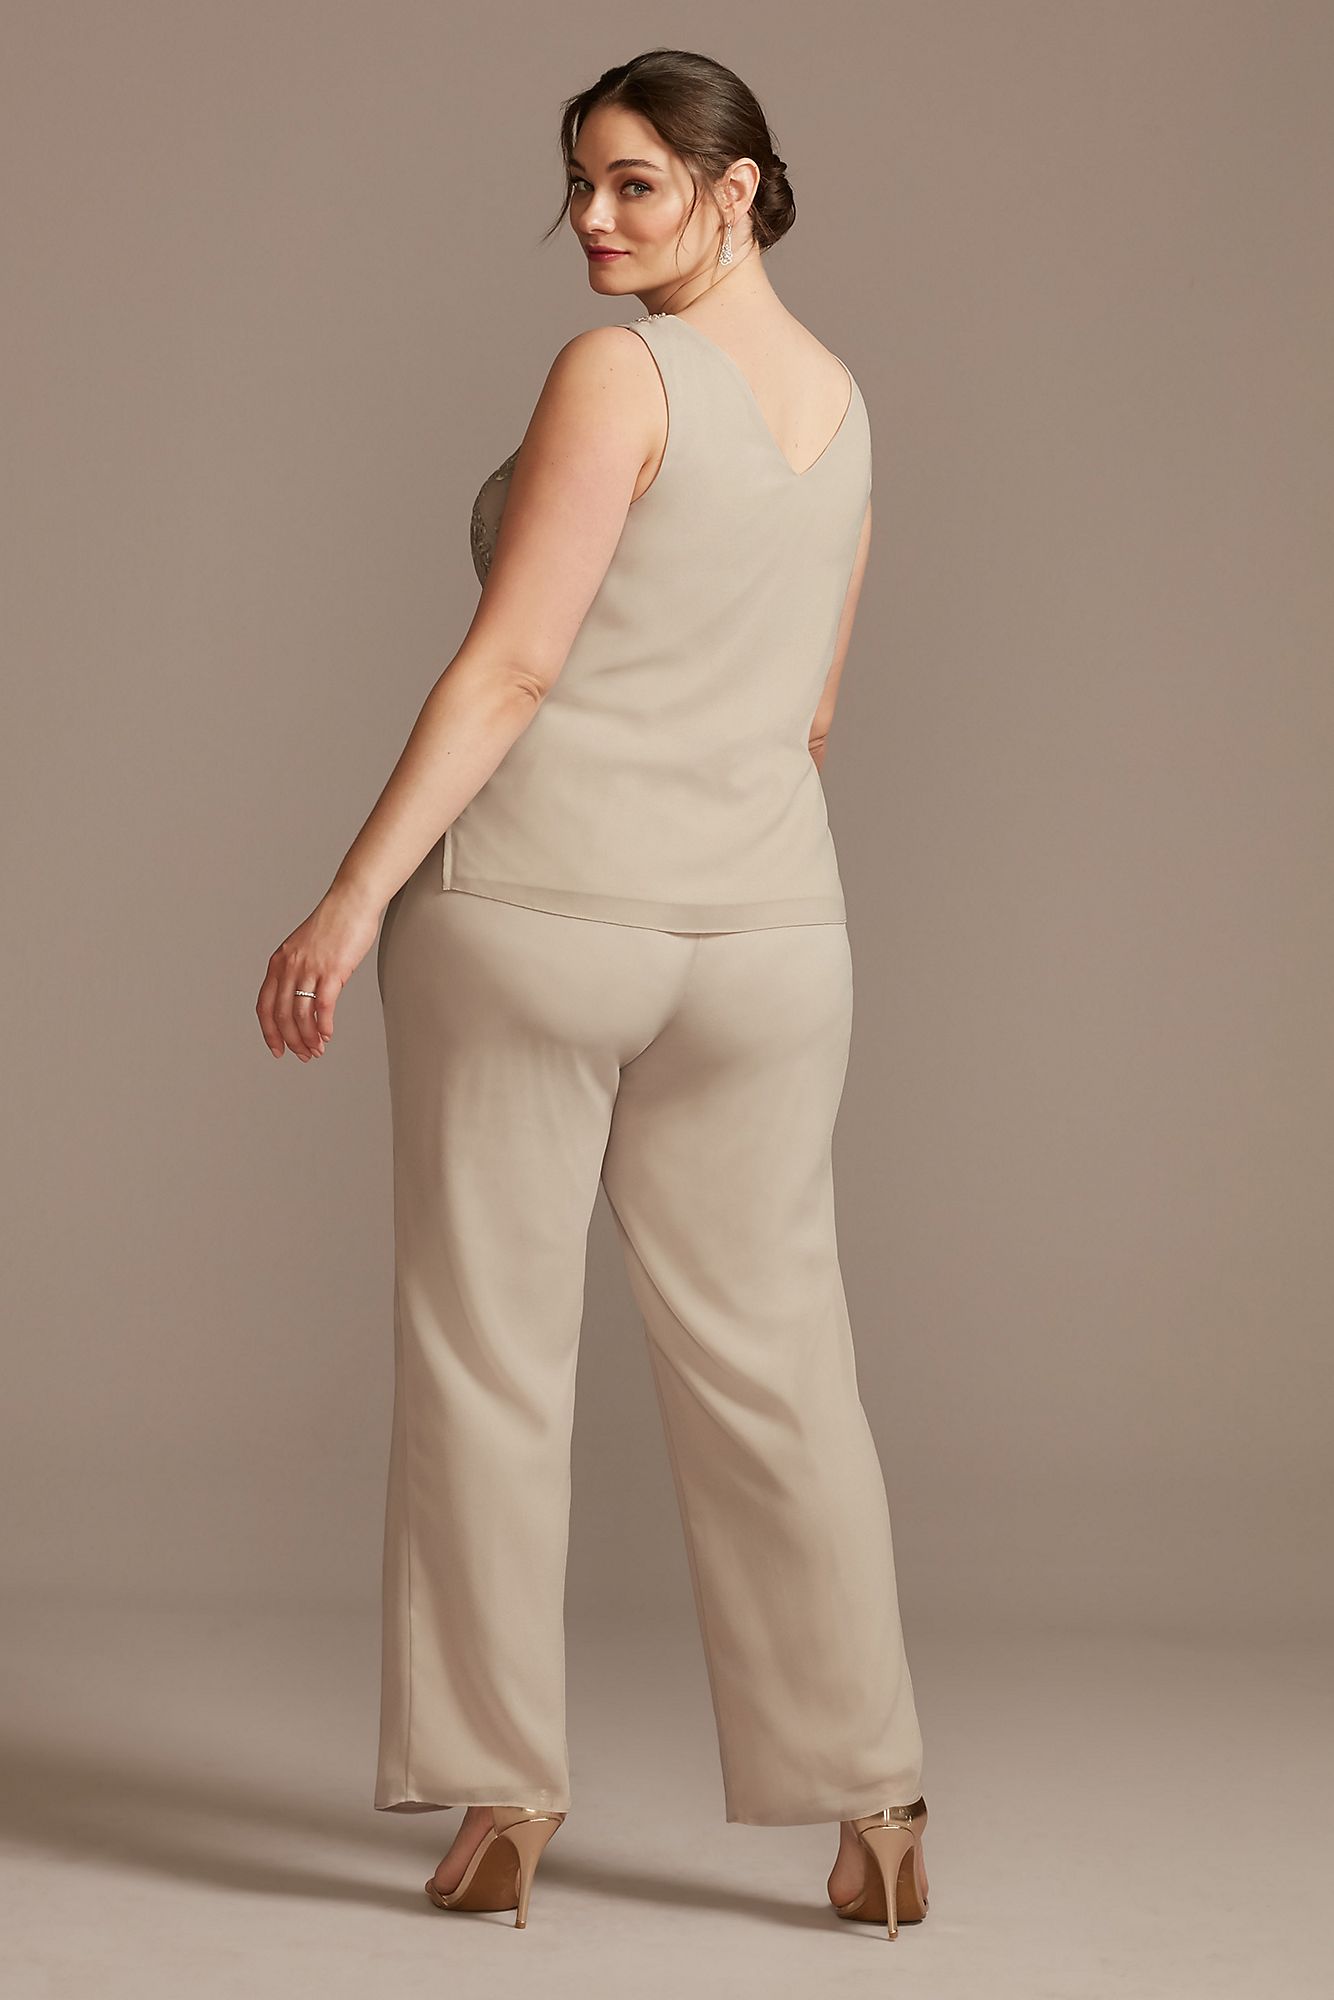 Embroidered Plus Size Three-Piece Pantsuit 29293